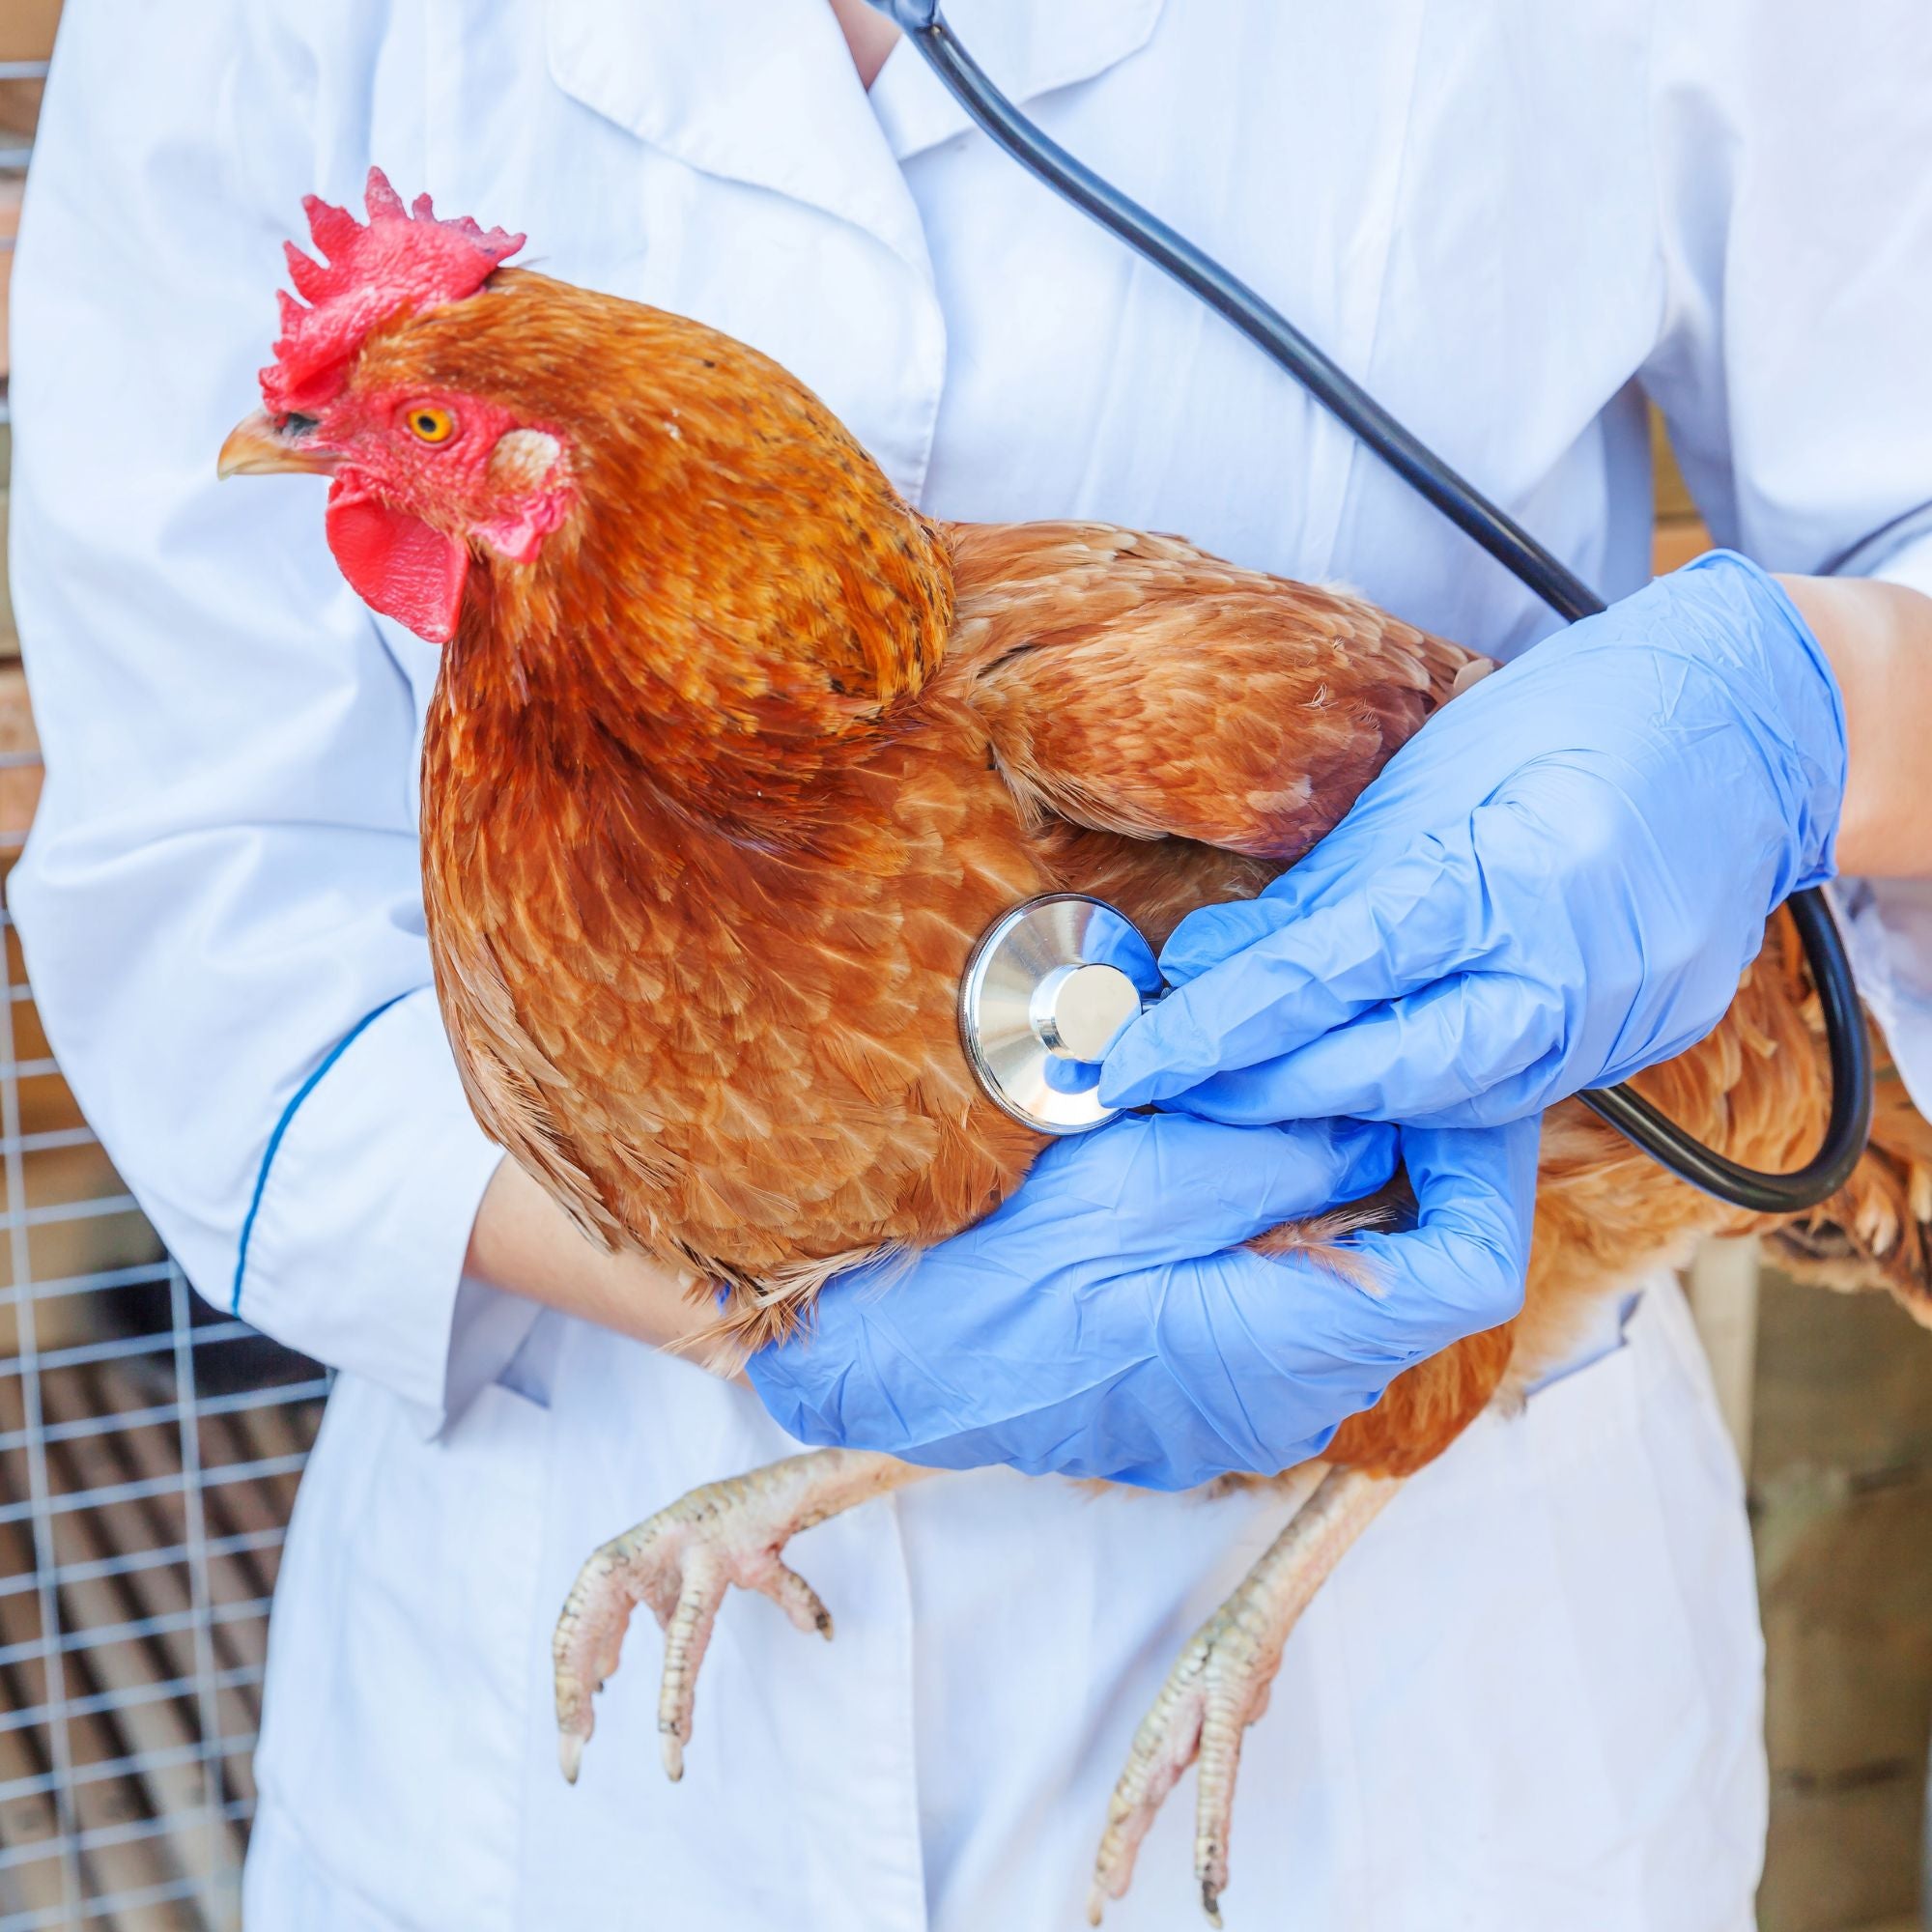 Learn how to care for a wounded chicken